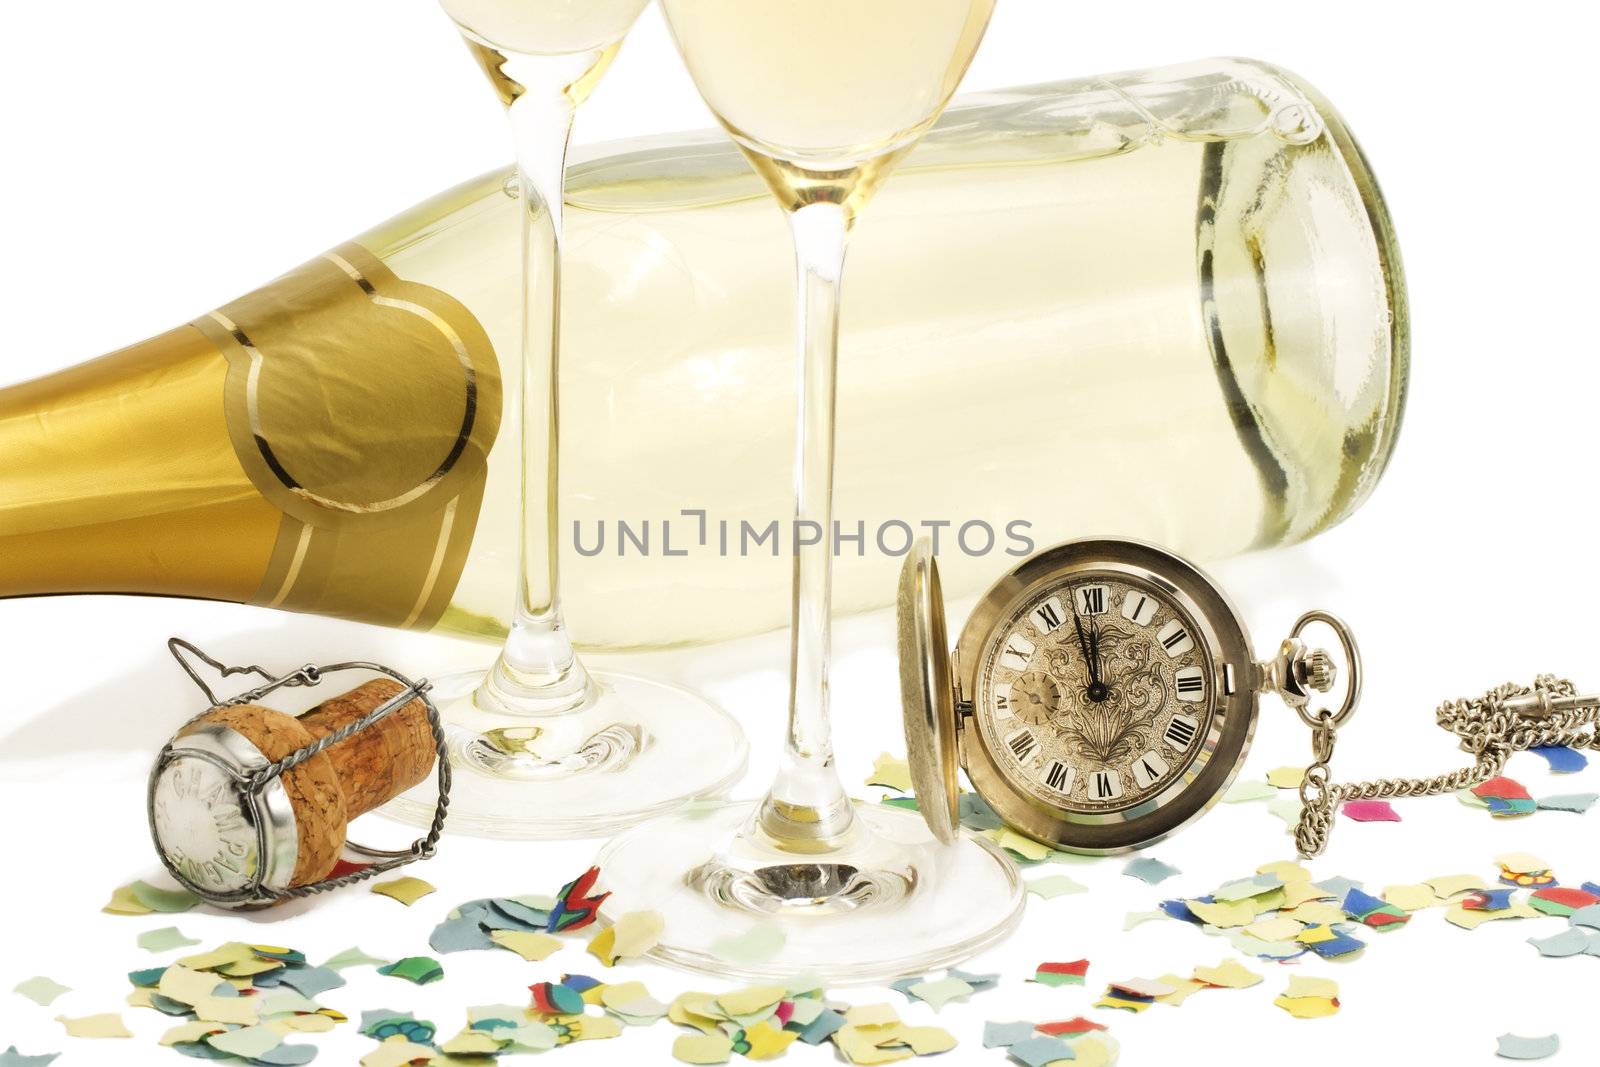 two glasses with champagne, old pocket watch, cork and confetti in front of a champagne bottle on white background